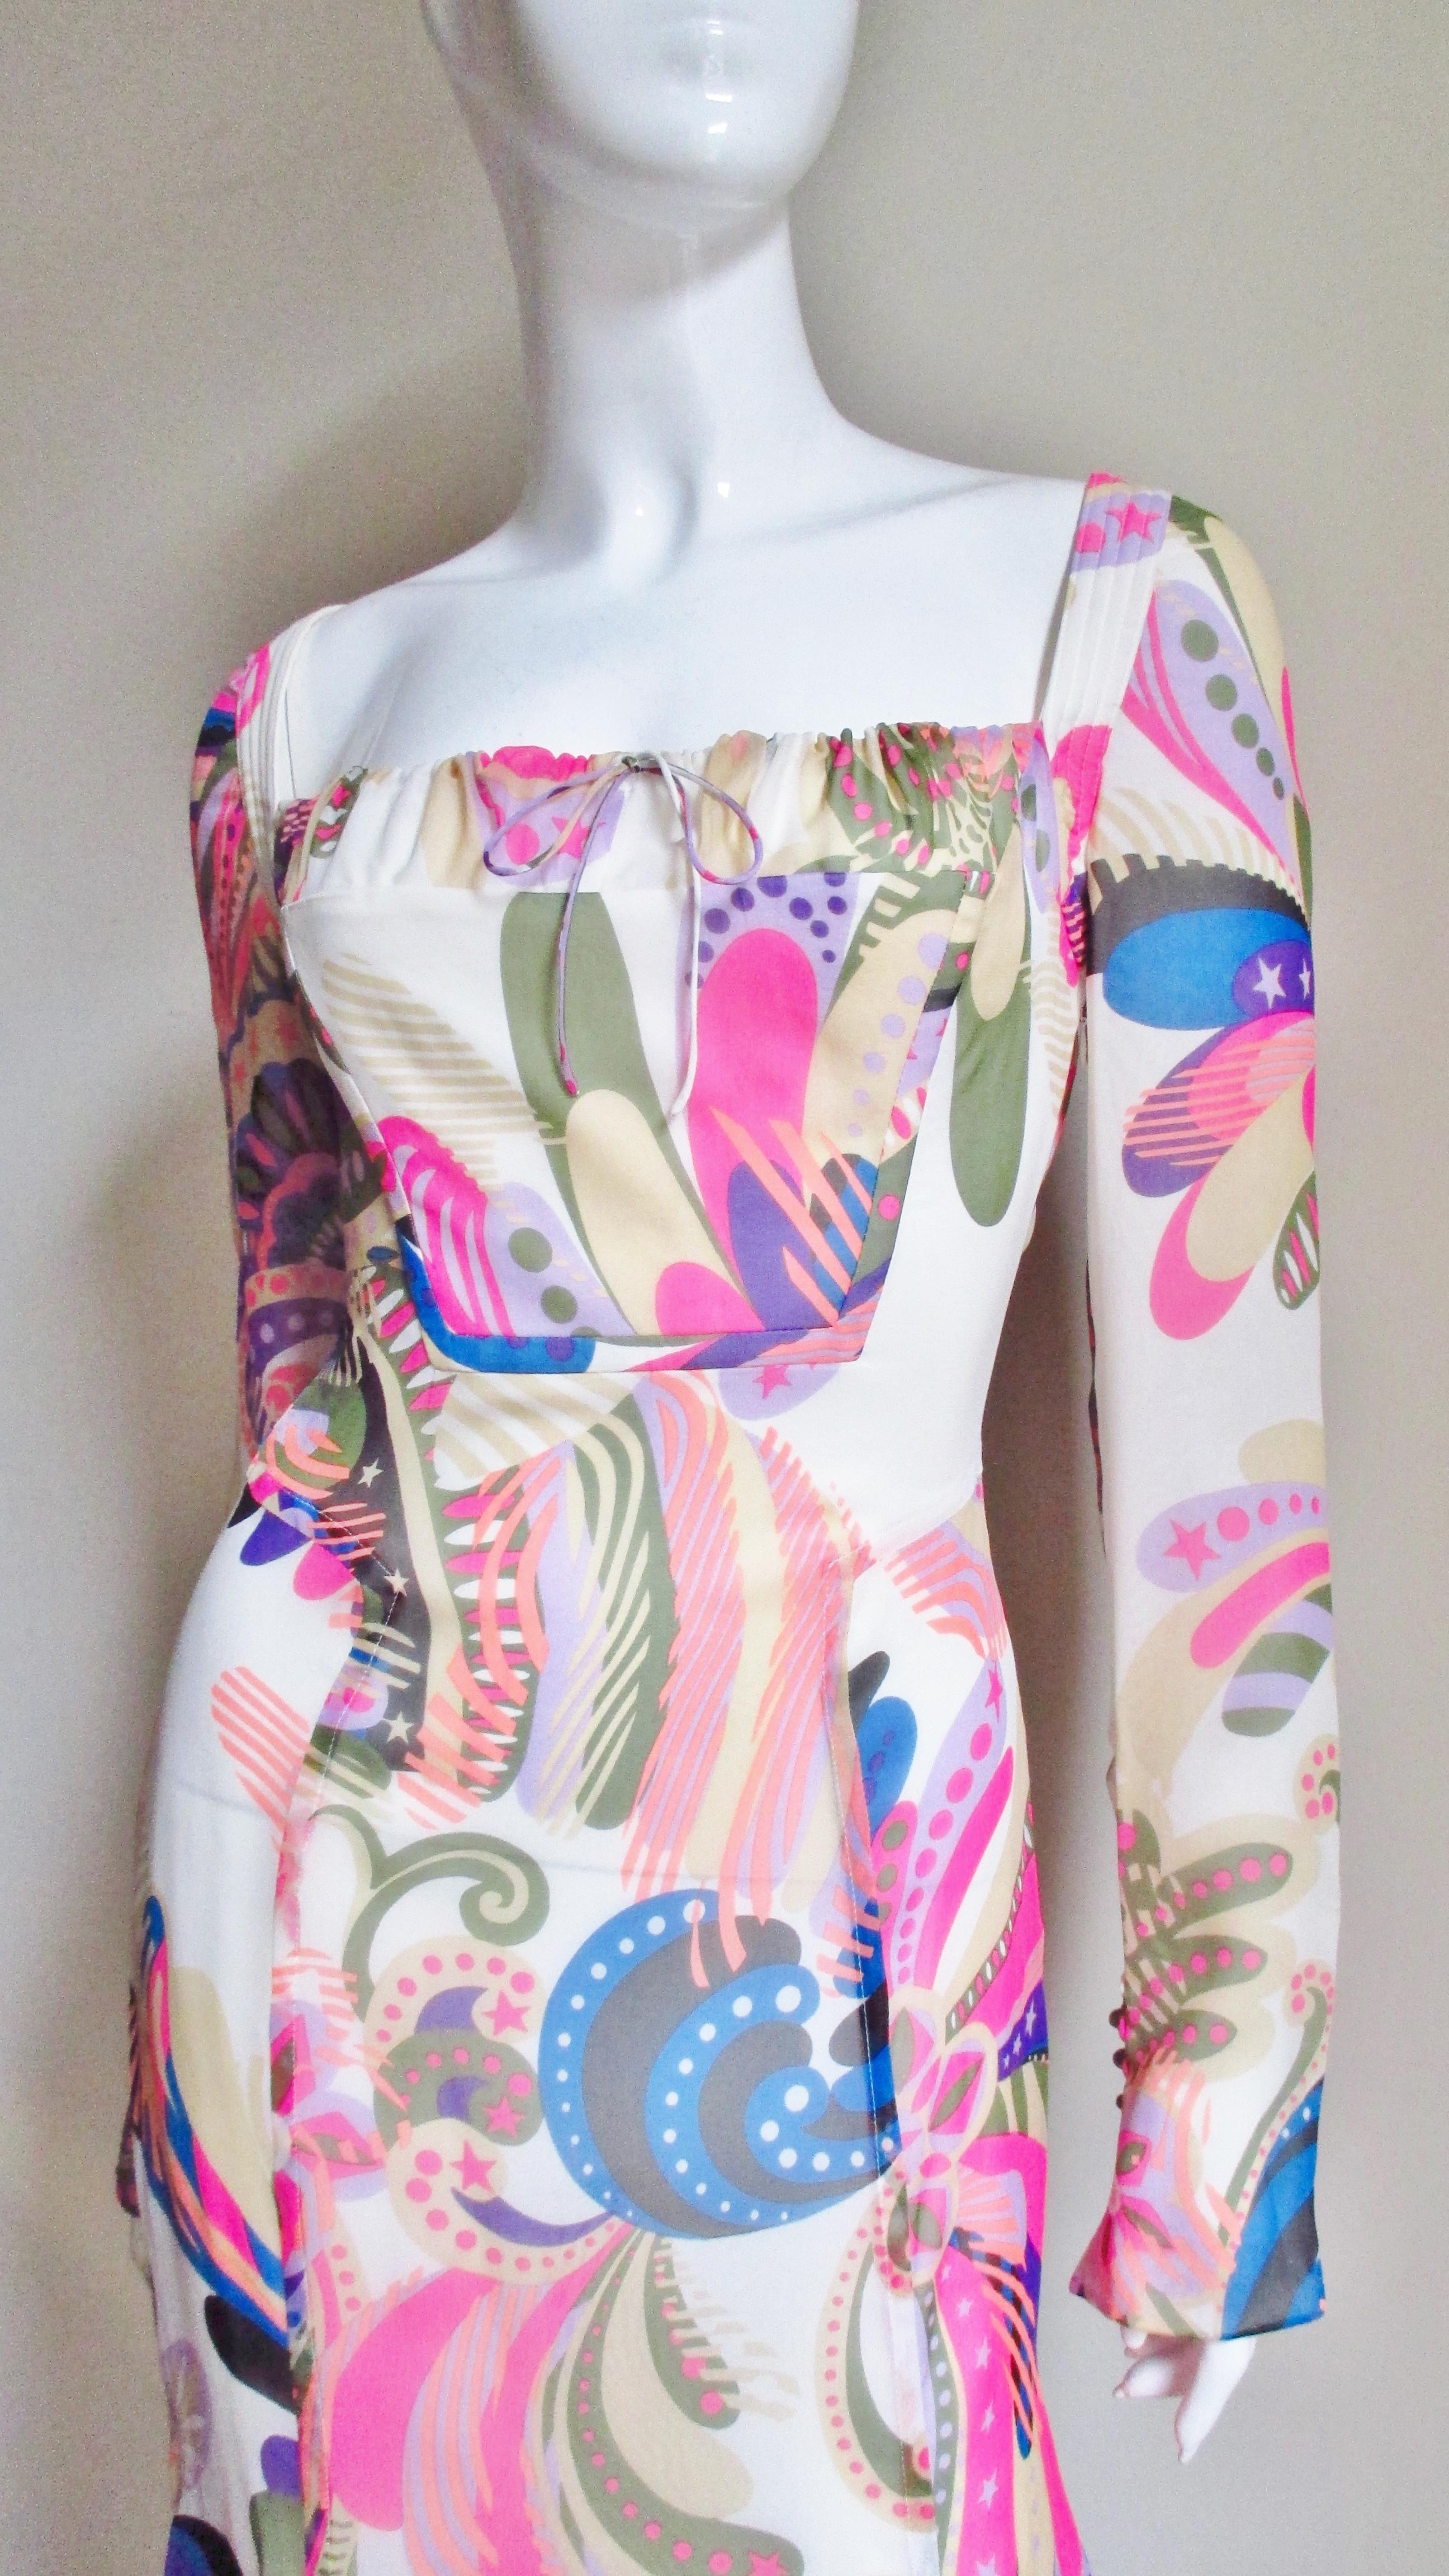 A beautiful silk dress from Gianni Versace Couture in a colorful pink, lavender and blue abstract print on a white background. The bodice has a front adjustable drawstring square neckline and the straight sleeves have 3 metal Versace stamped buttons